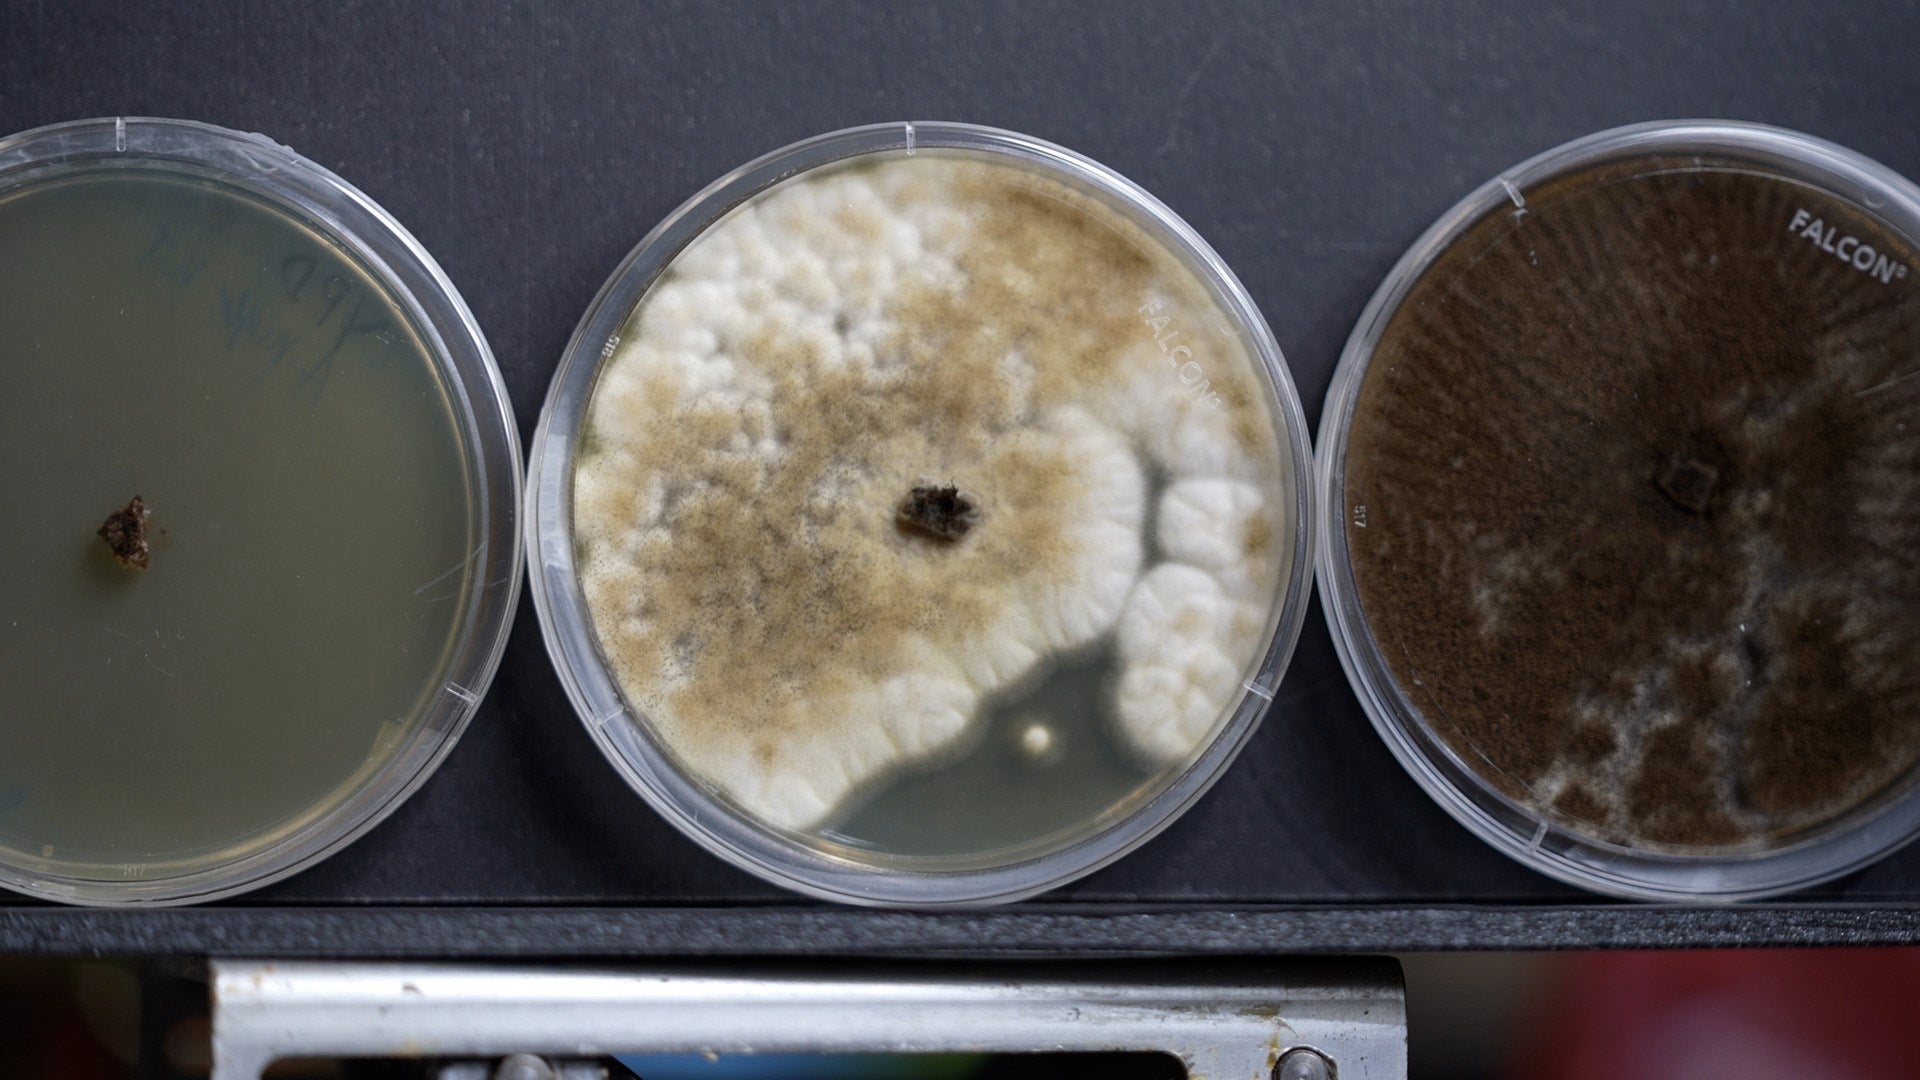 Three samples of Aspergillus niger fungus are shown at different growth durations at the U.S. Naval Research Laboratory (NRL), Washington, D.C. August 15, 2022. The fungal biology research team at NRL uses Aspergillus niger to study the roles of melanin and DNA repair on adaptation and survivability of microorganisms in deep space. (Sarah Peterson/U.S. Navy)